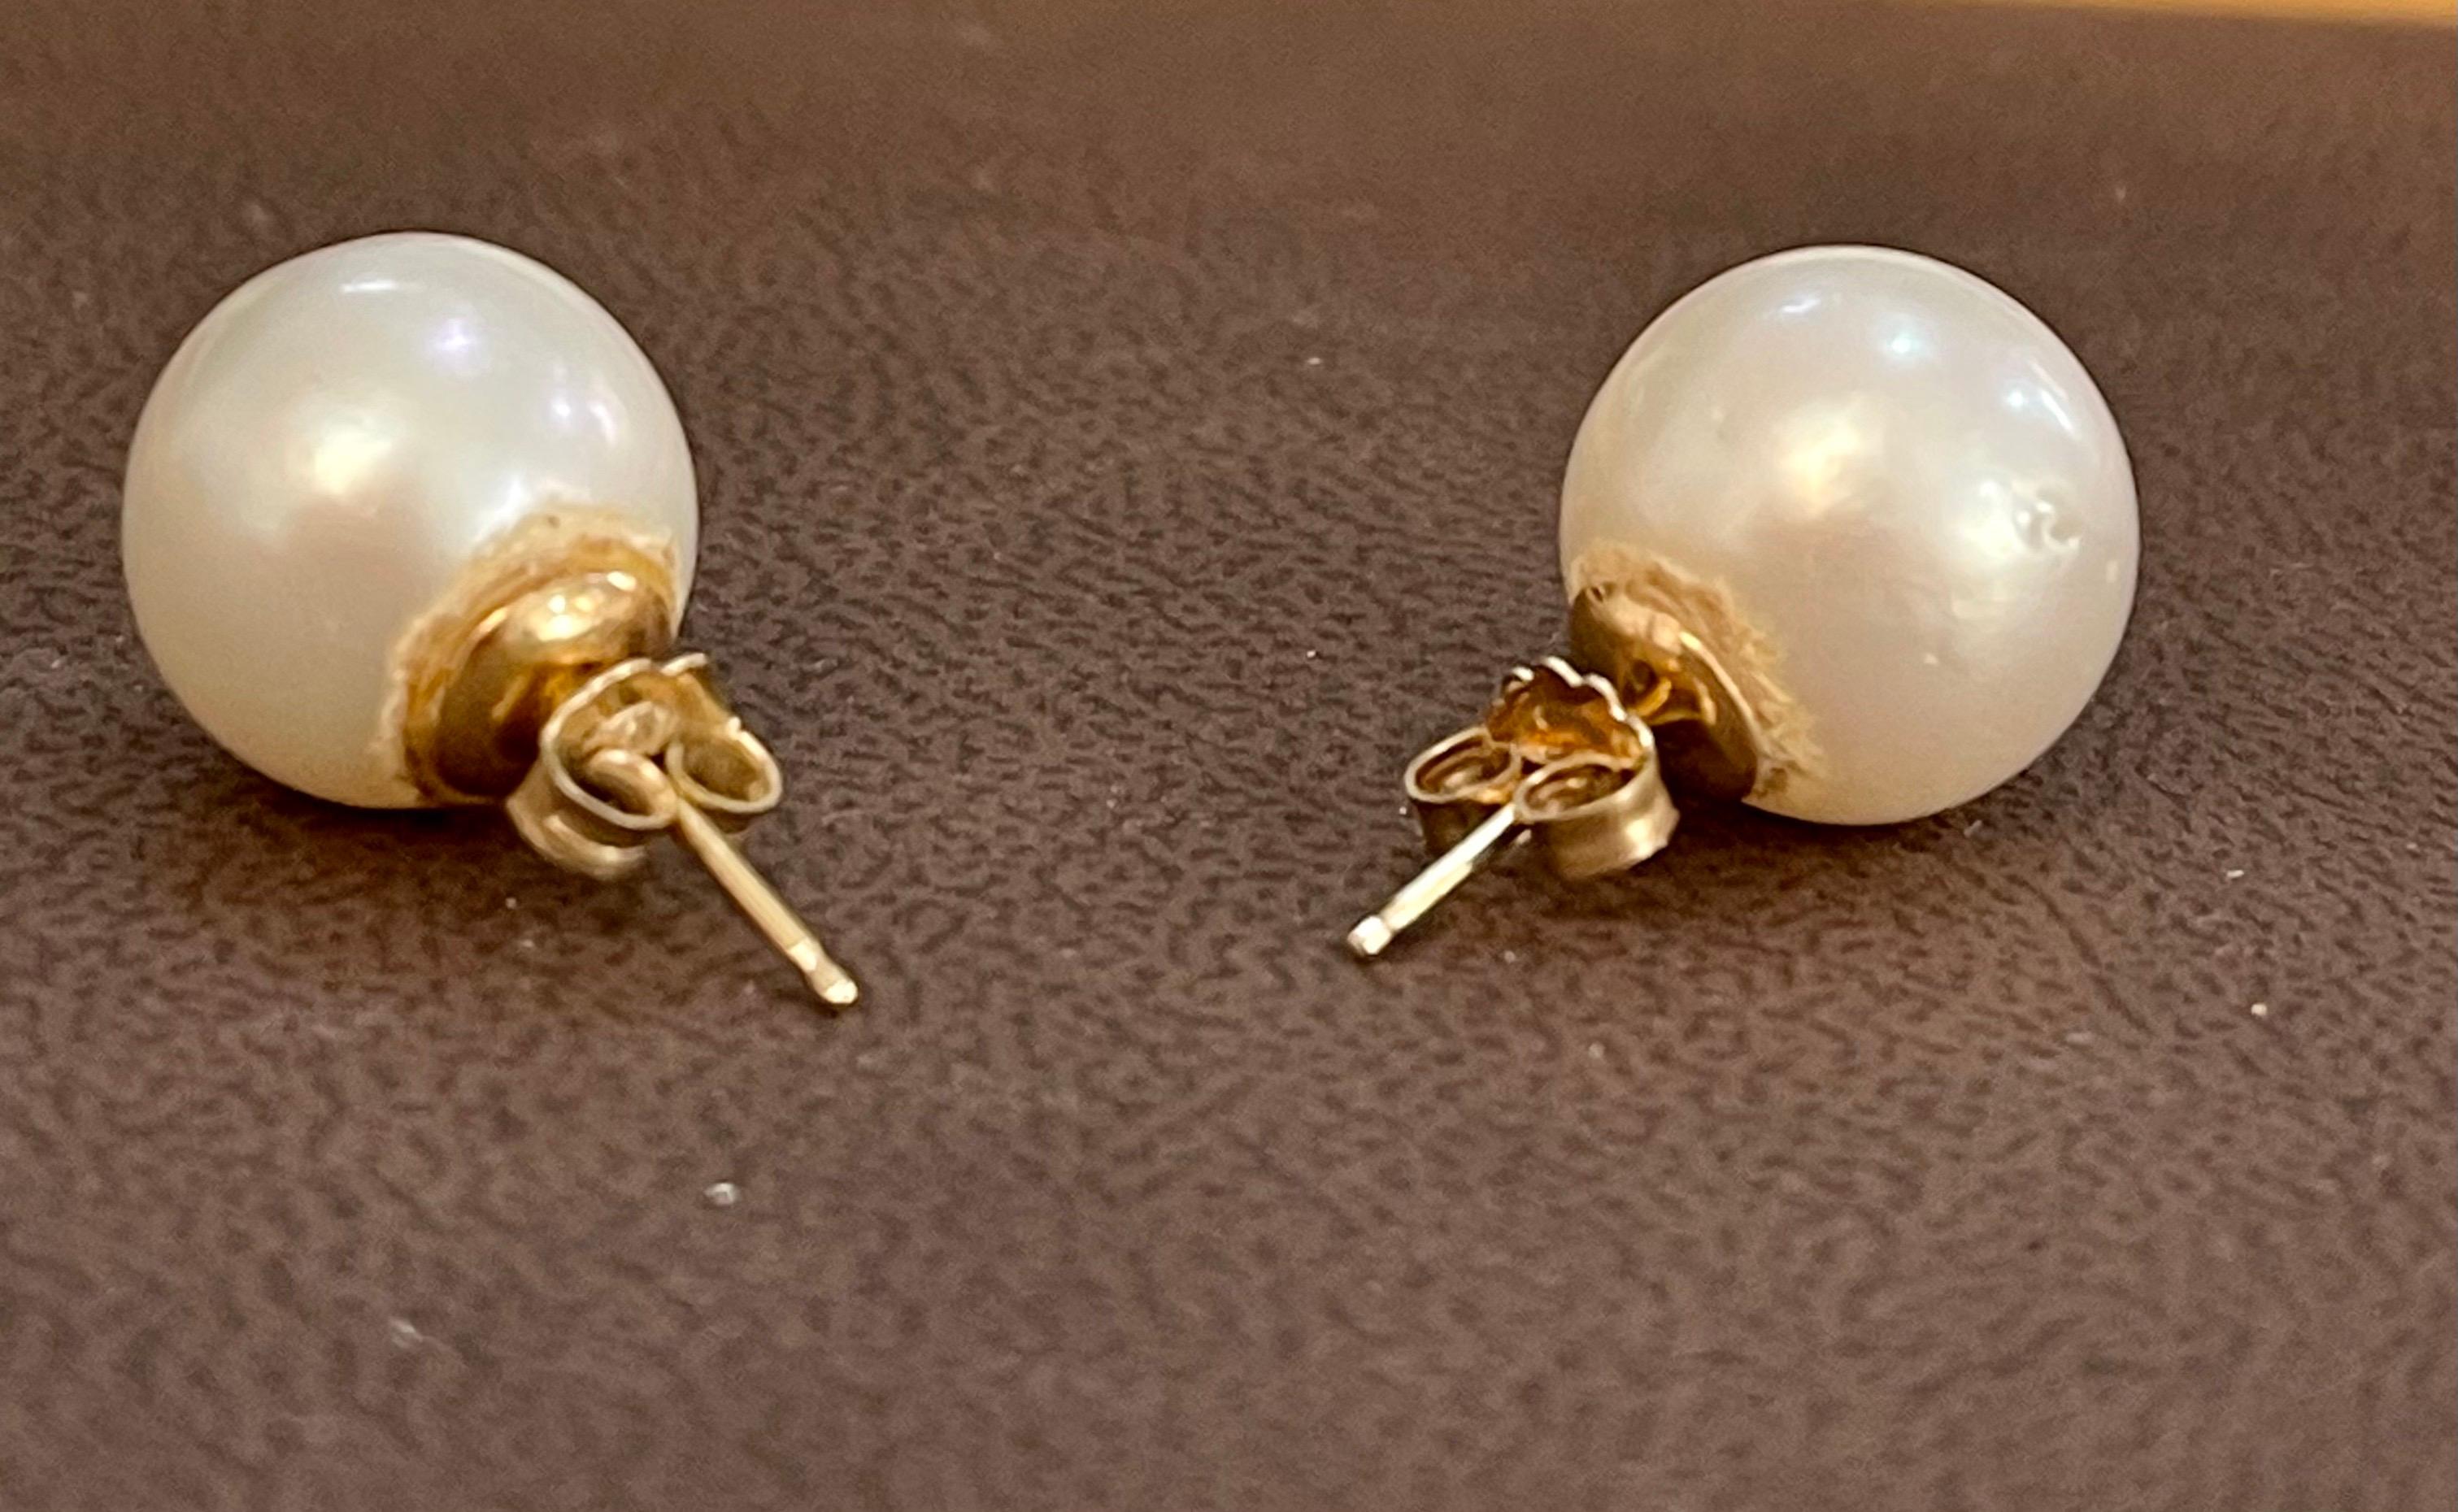 13 MM White South Sea Pearl Stud Earrings 14 Karat Yellow Gold 
 pearls are clean with little bit  blemishes .Approximately 13 mm 
perfect pair made in 14 Karat Yellow gold
backs are made of solid 14 k gold and very sturdy to keep the pearl